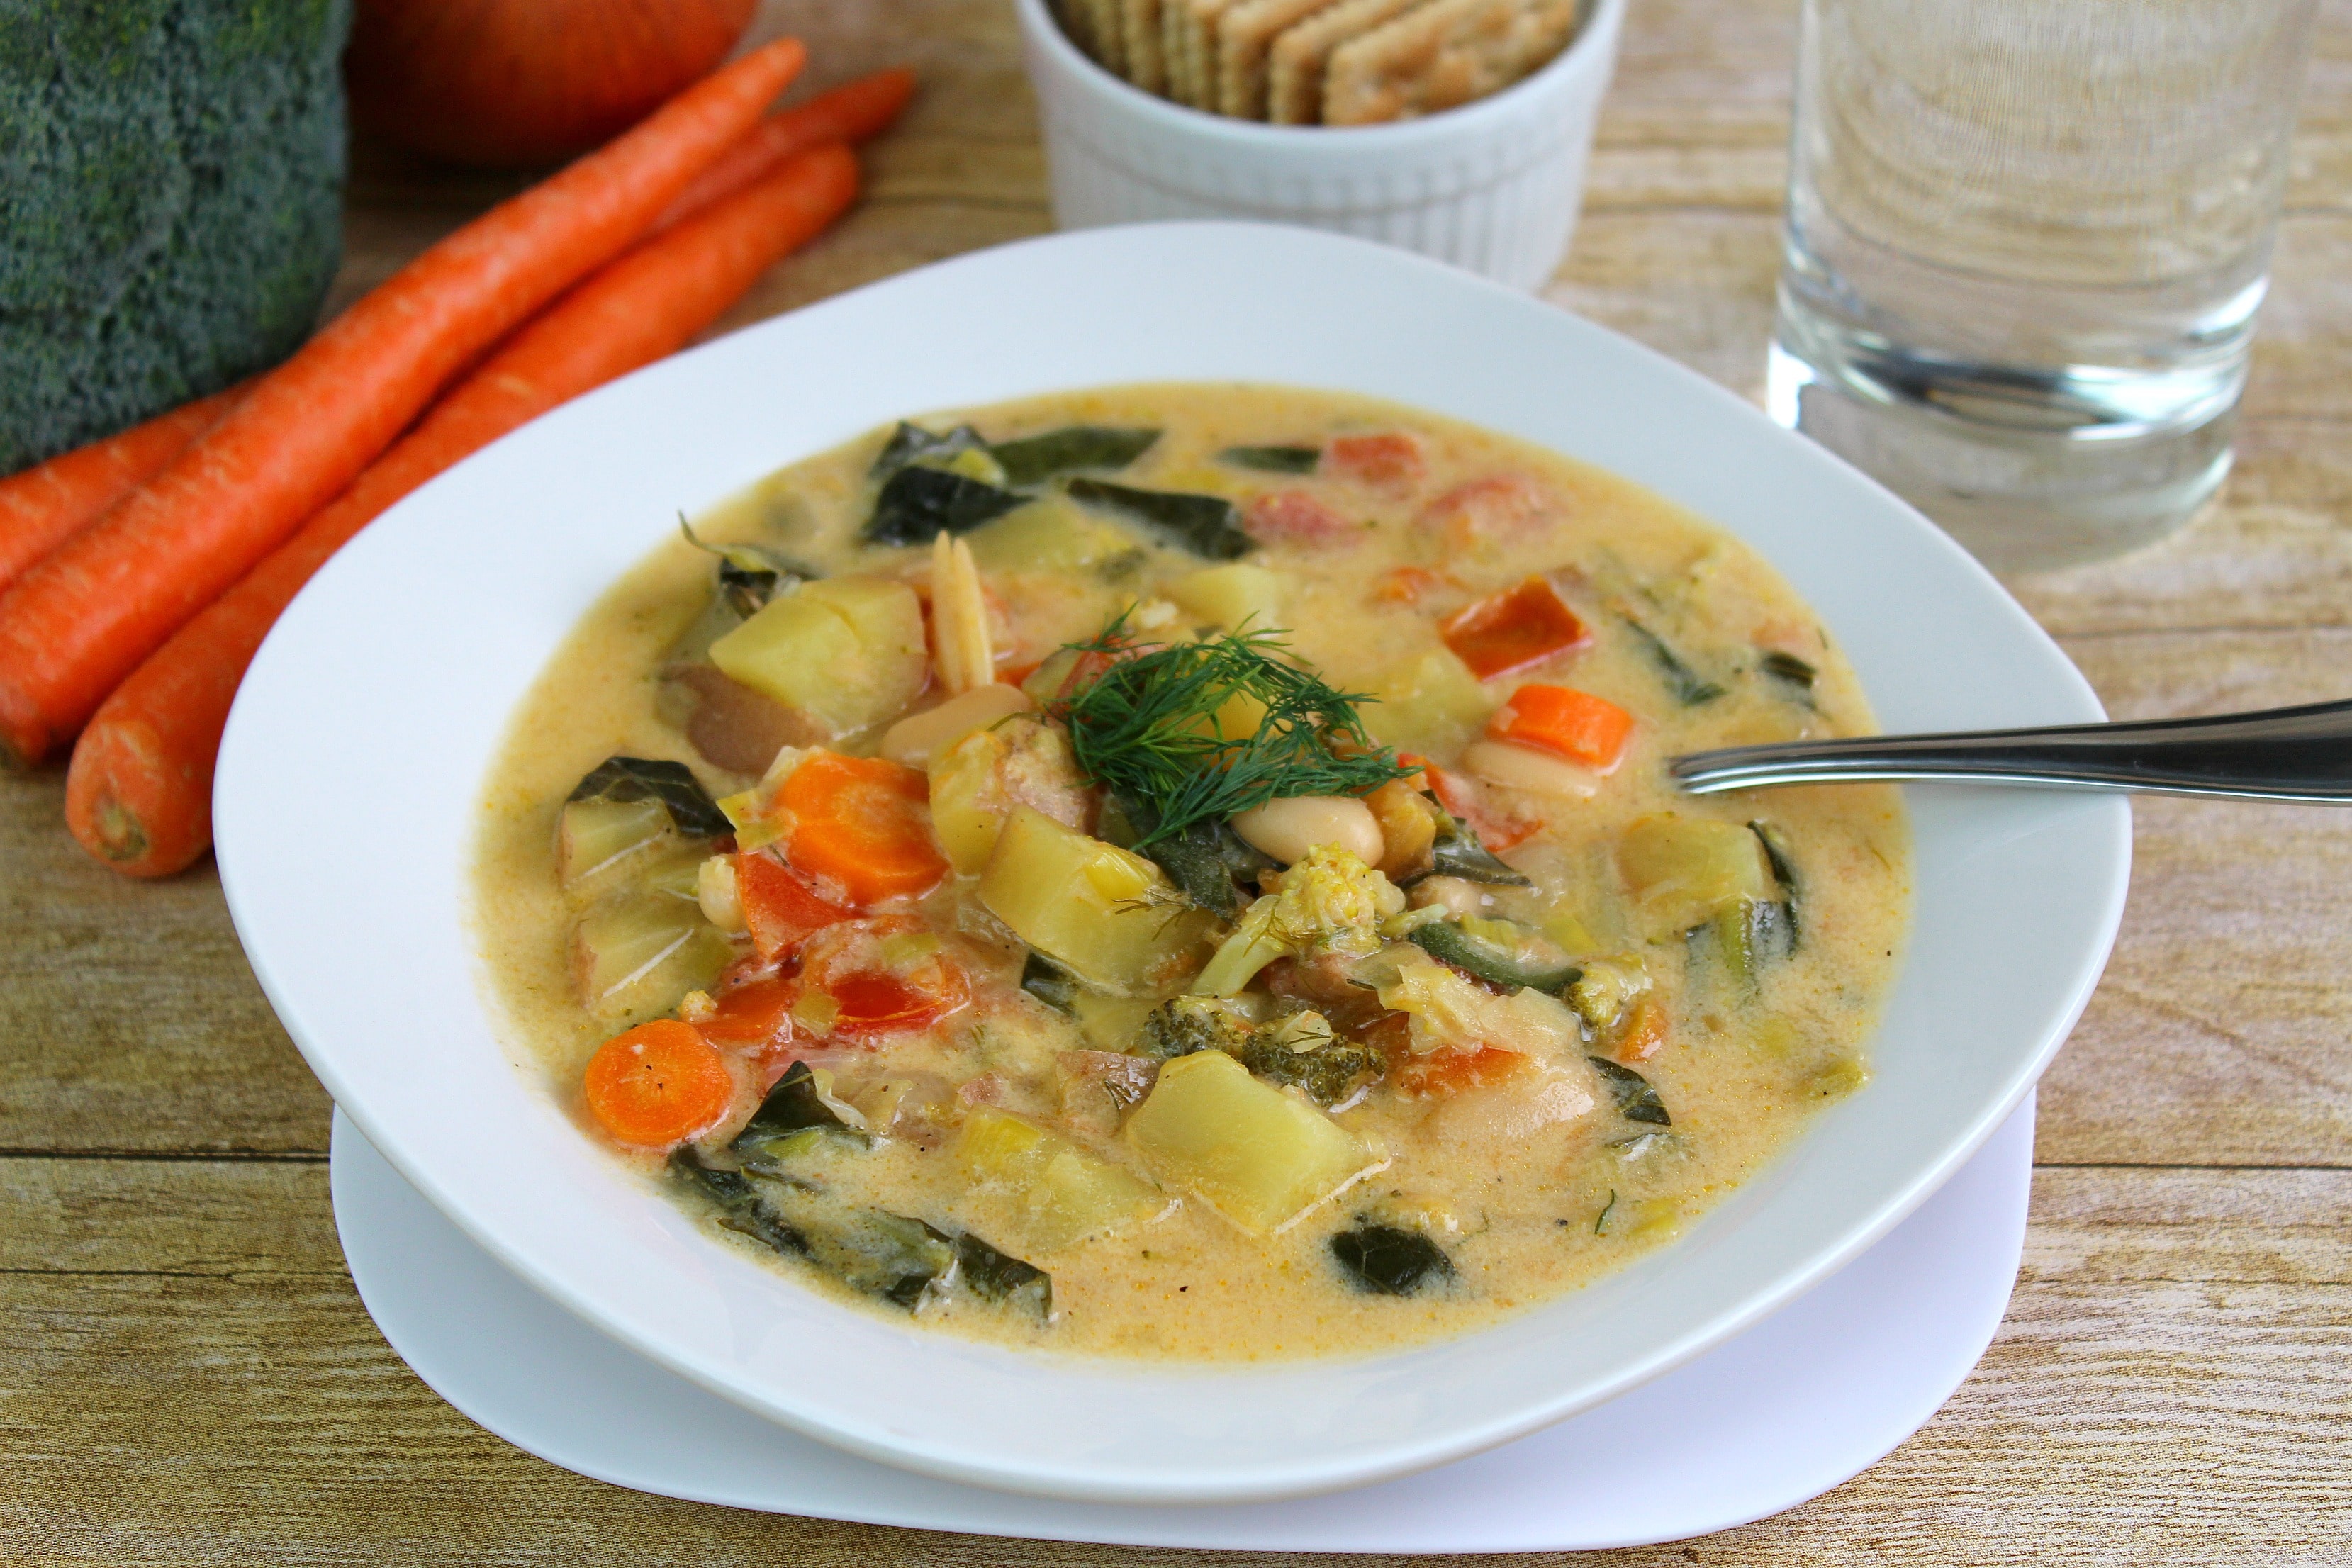 Serve the finished creamy dill vegetable soup with crackers and a fresh garnish. 